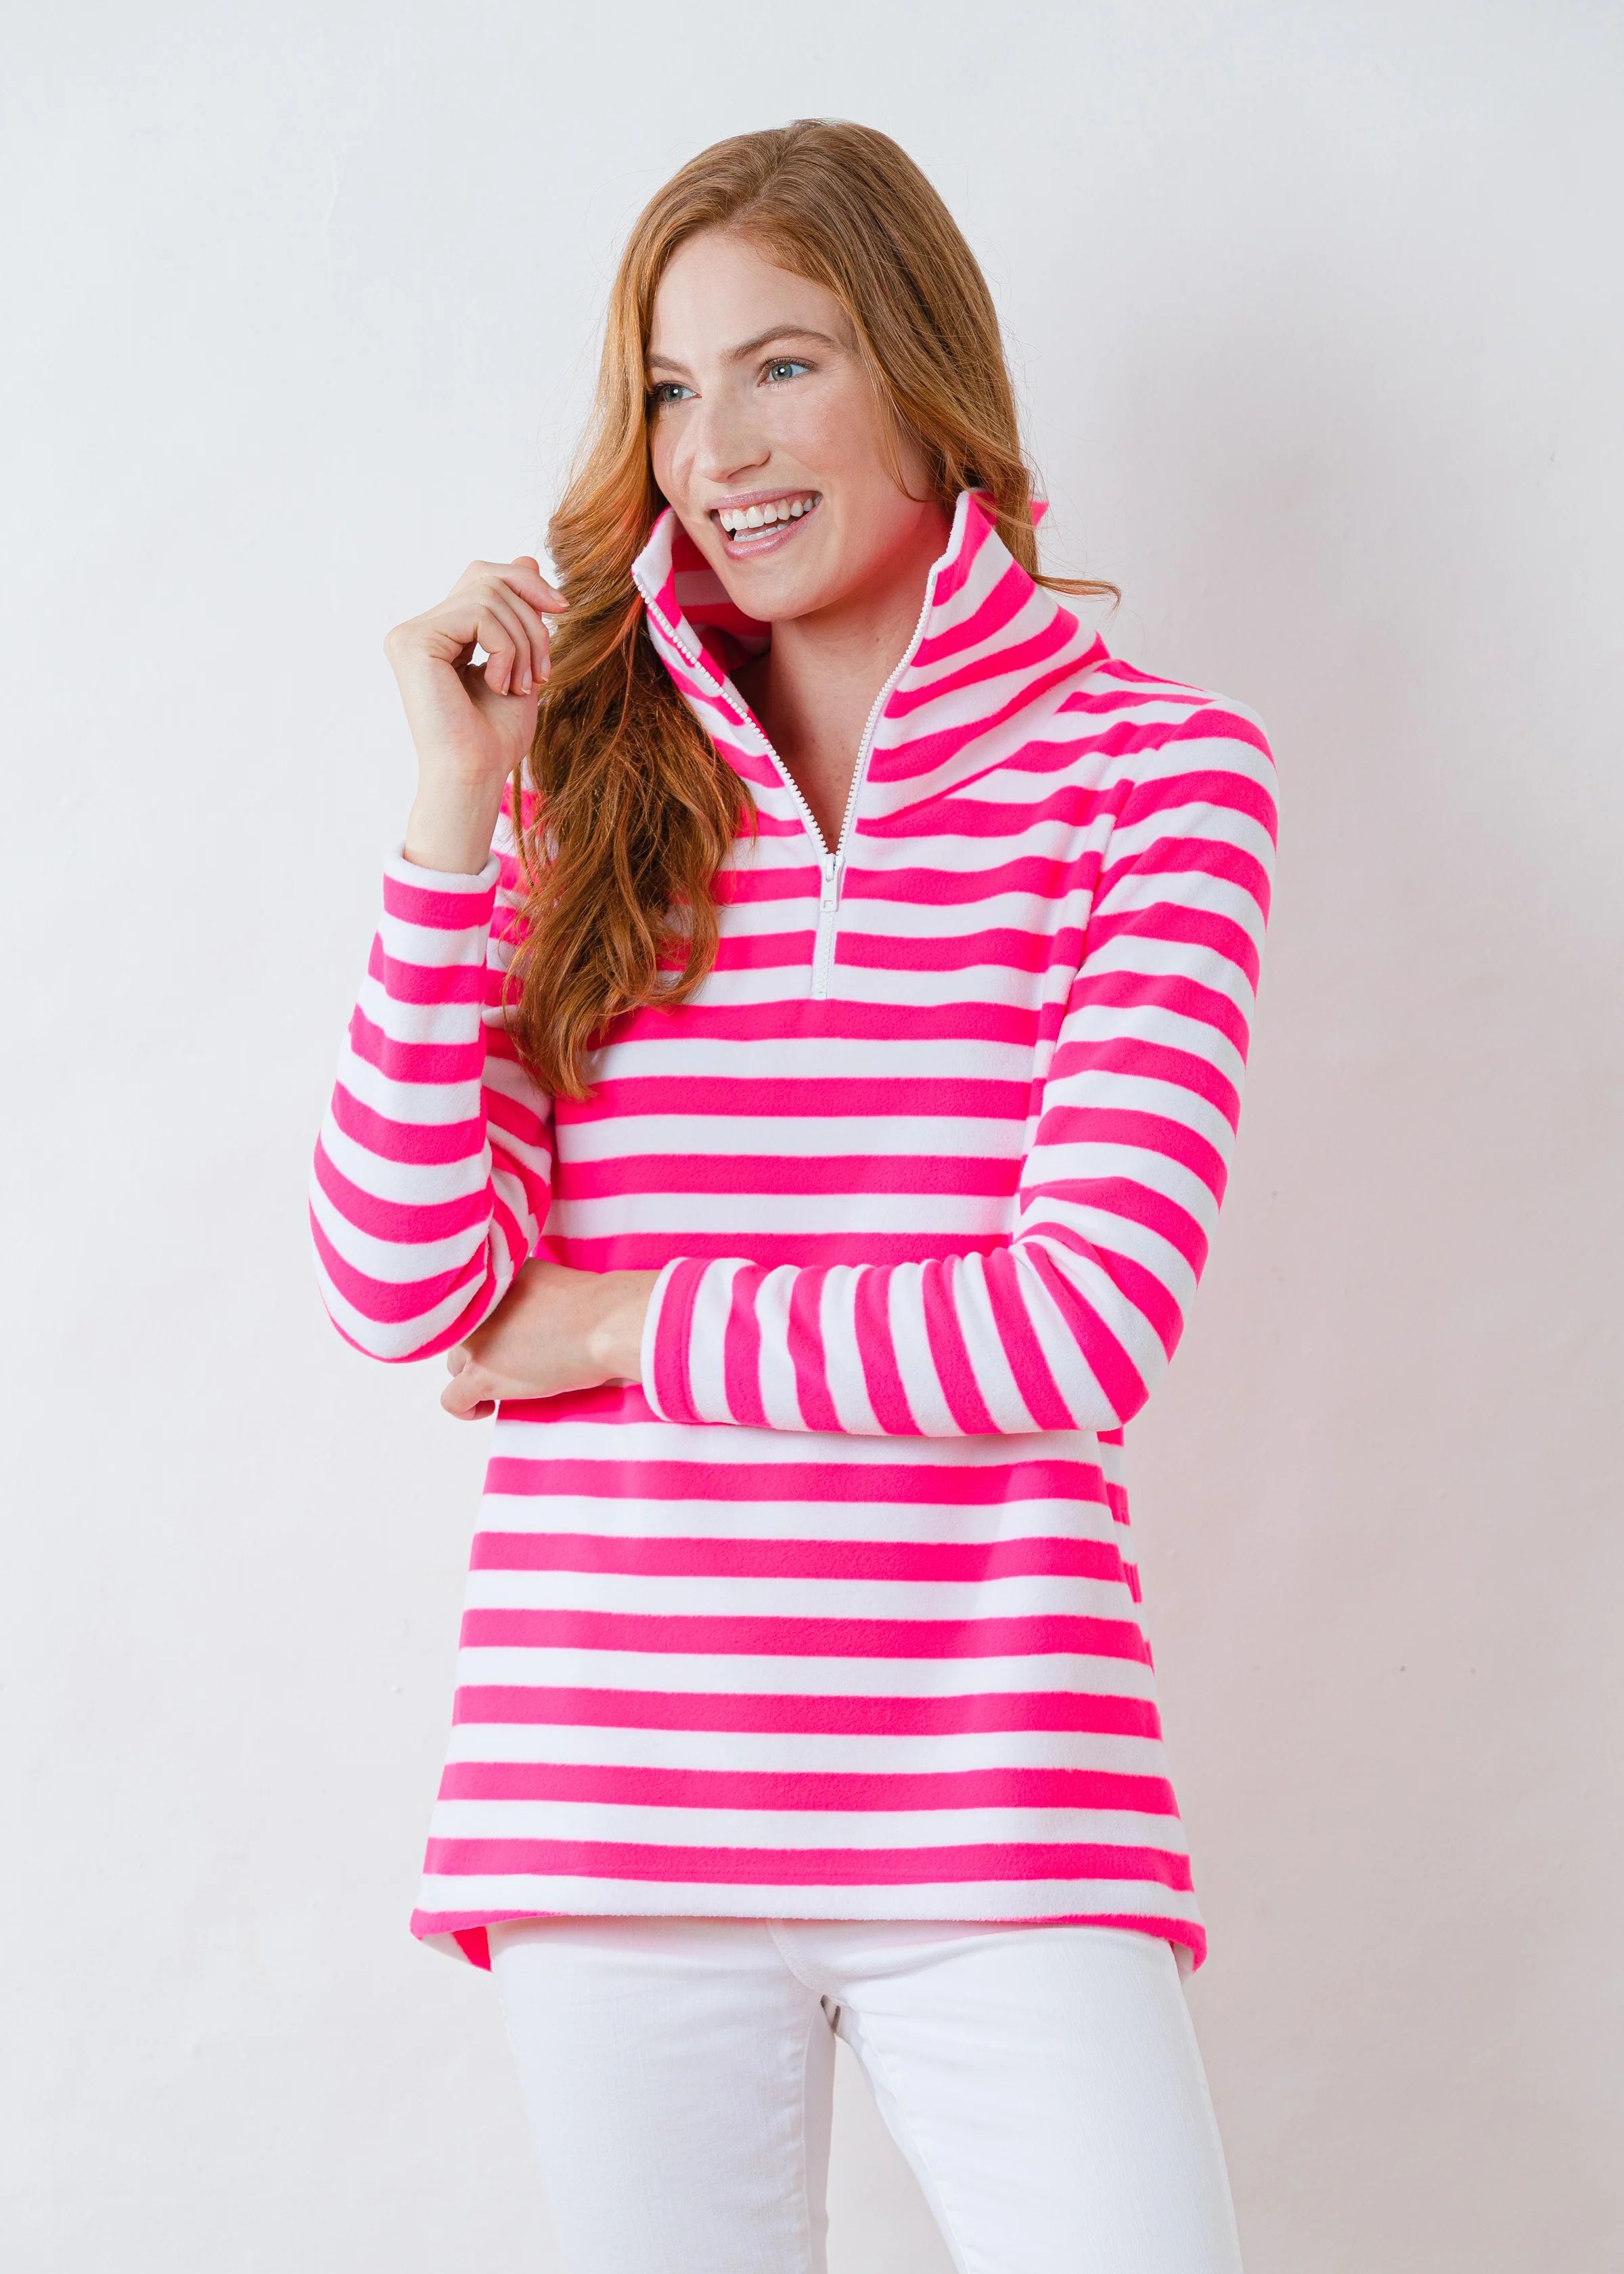 Prospect Pullover in Striped Fleece (Neon Pink / White) | Dudley Stephens